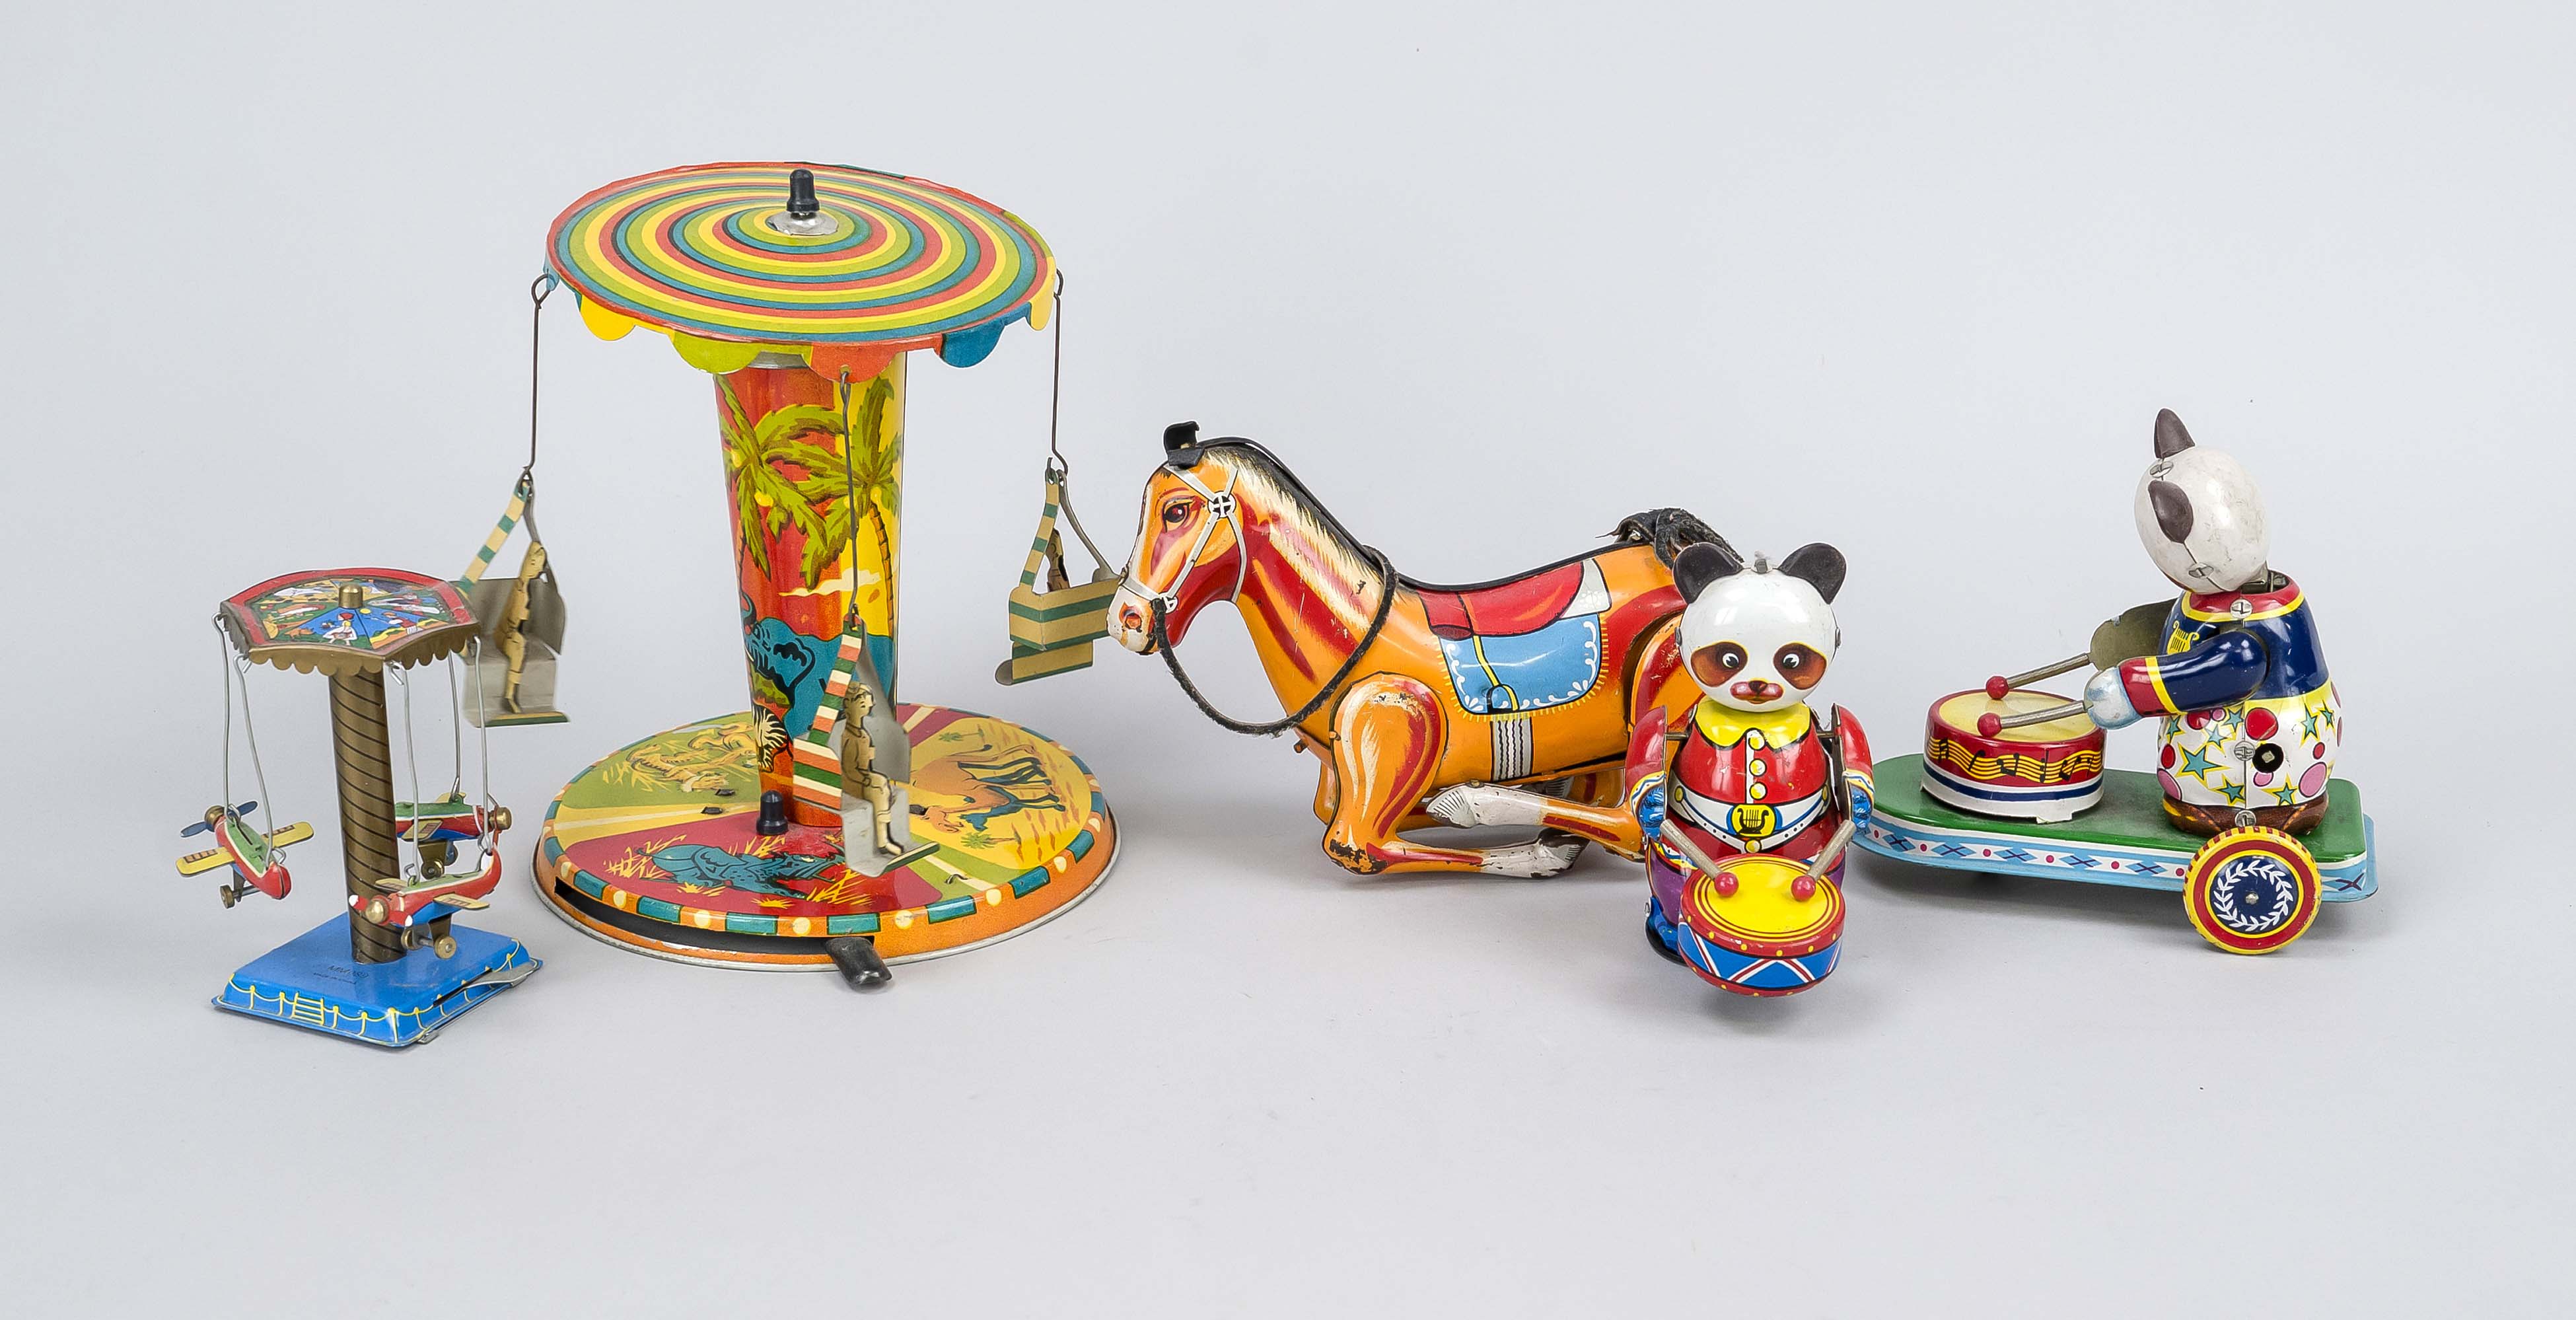 5 x tin toy with winding mechanism, 20th century, color painted tin, h. up to 17 cm